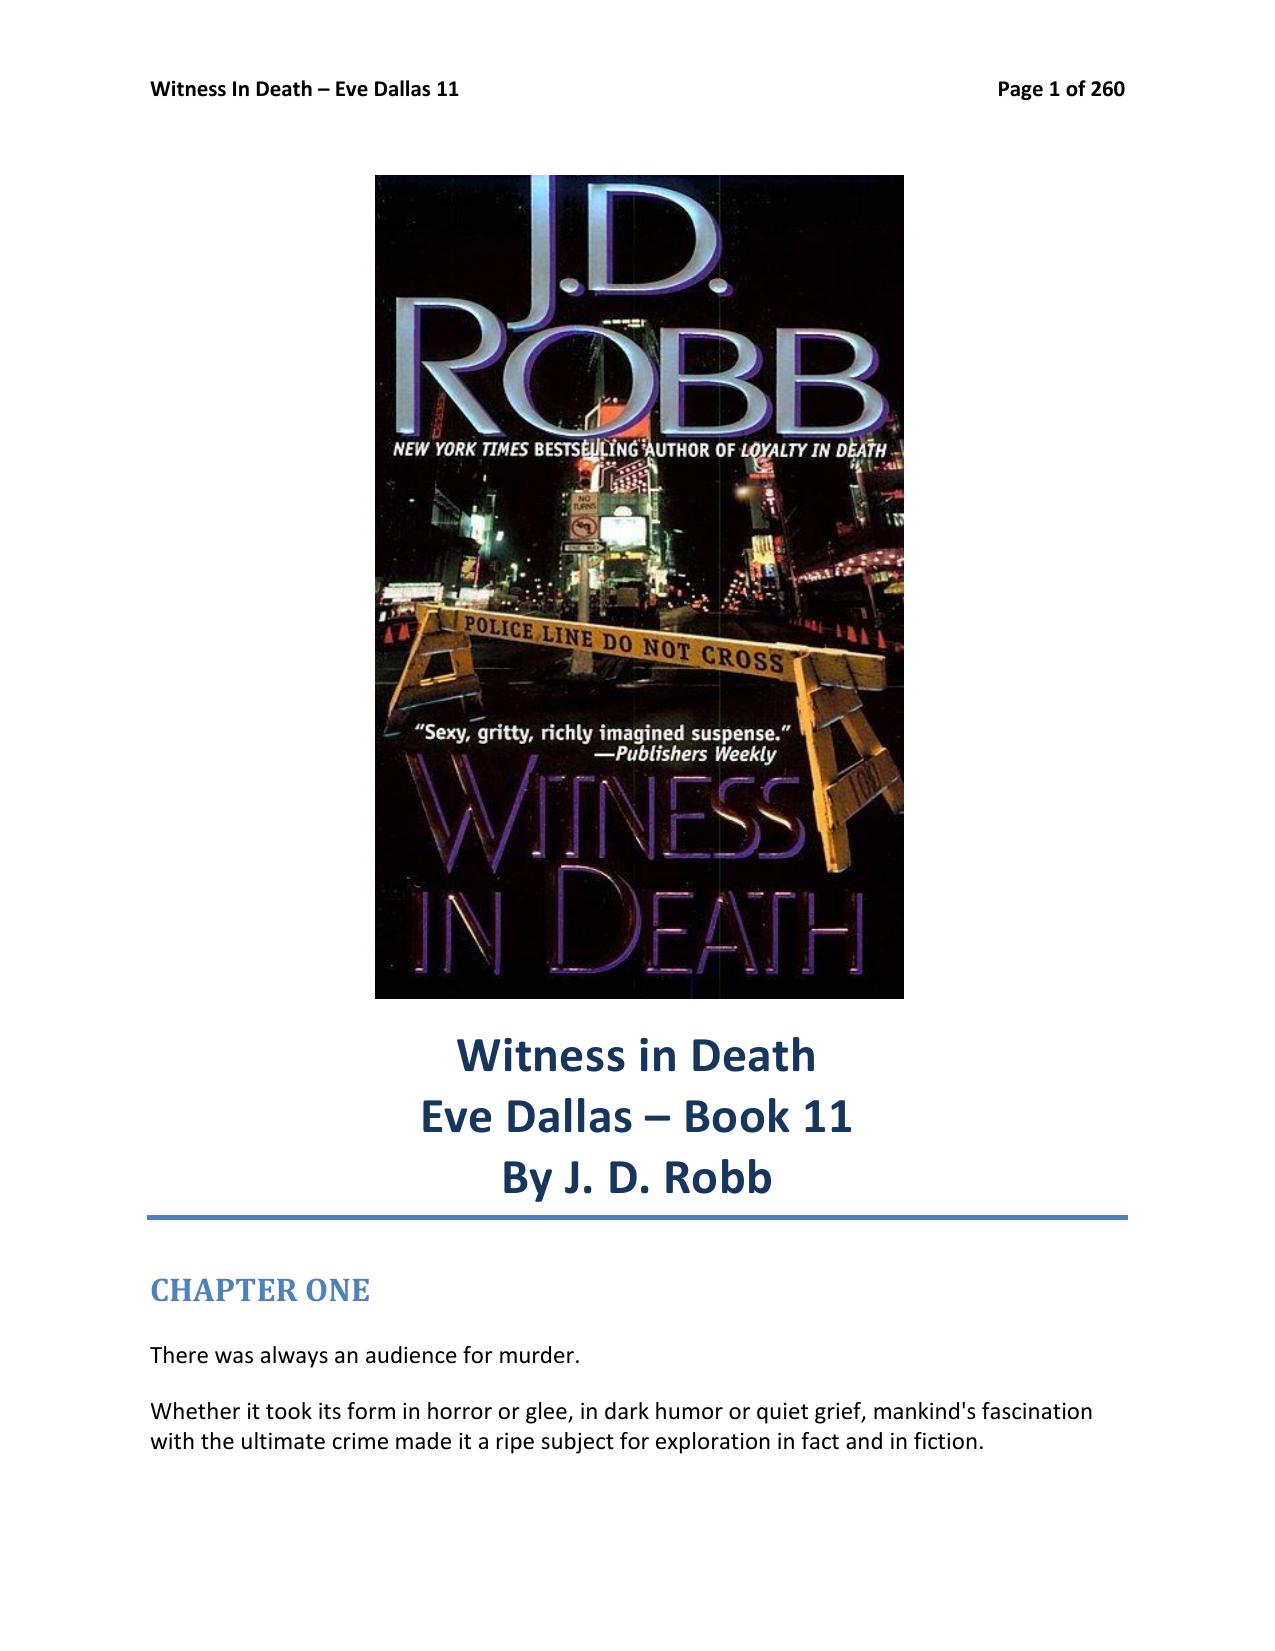 Witness in Death by J.D. Robb